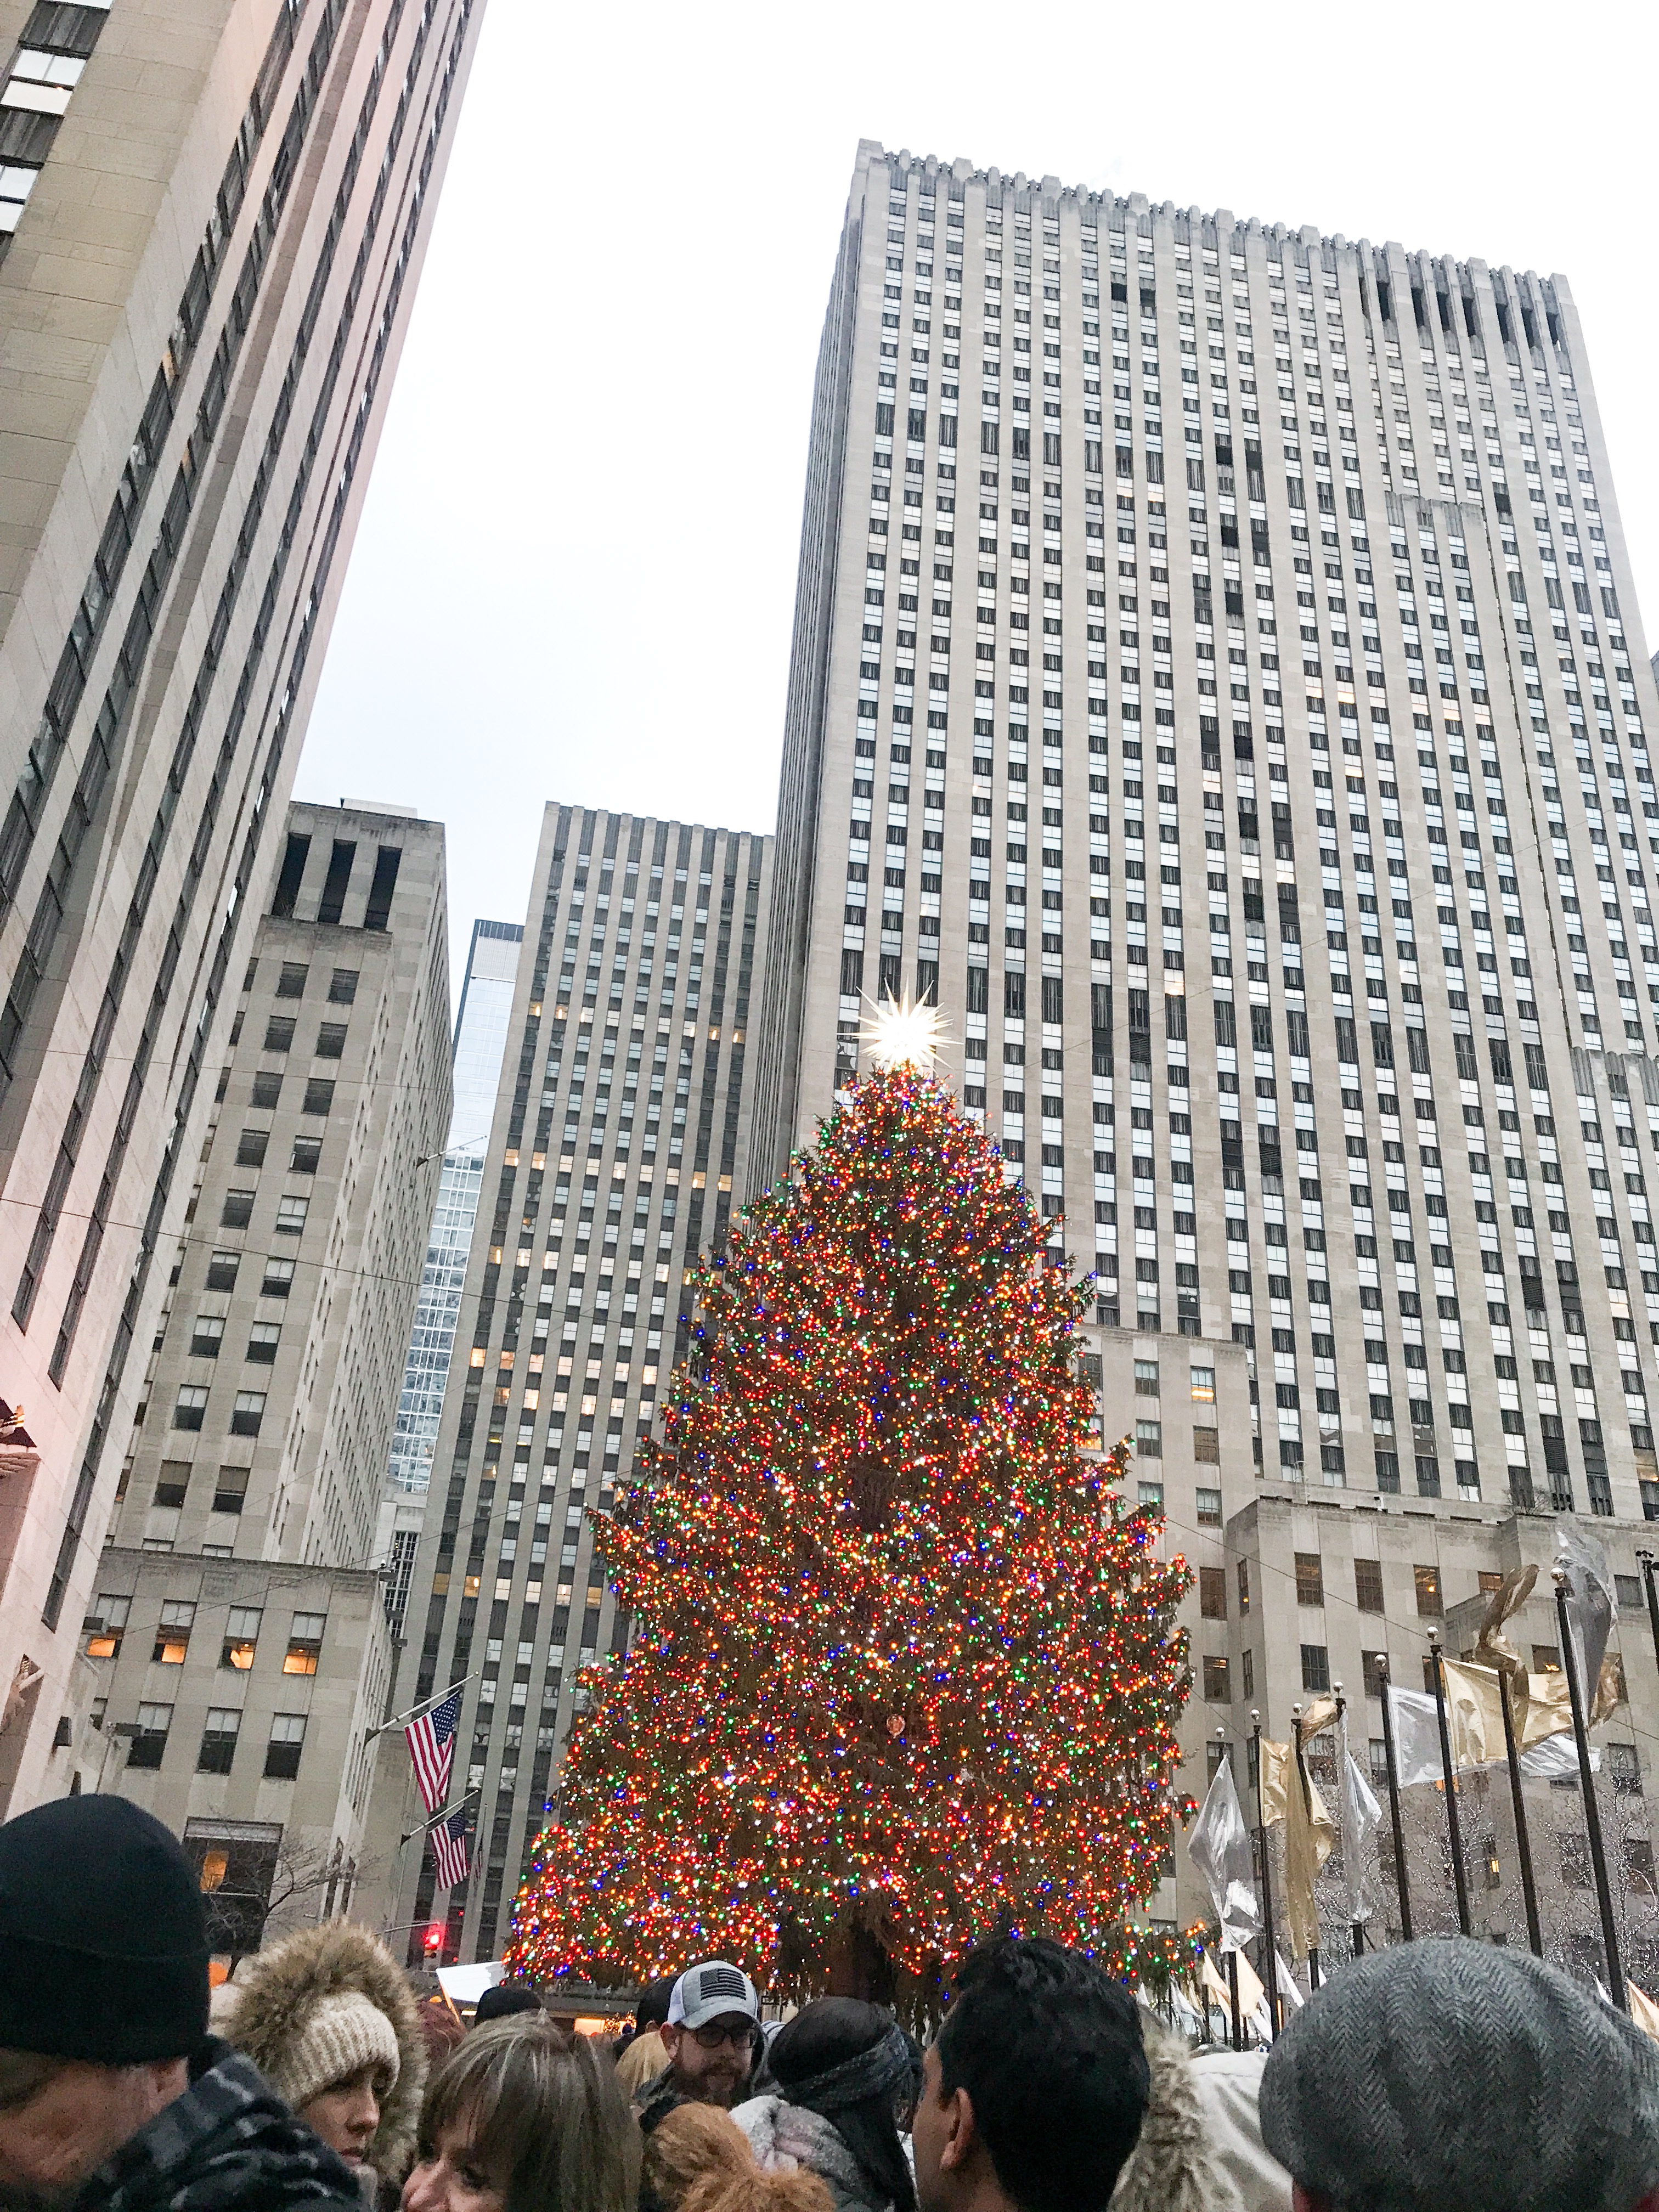 What to do in NYC at Christmas